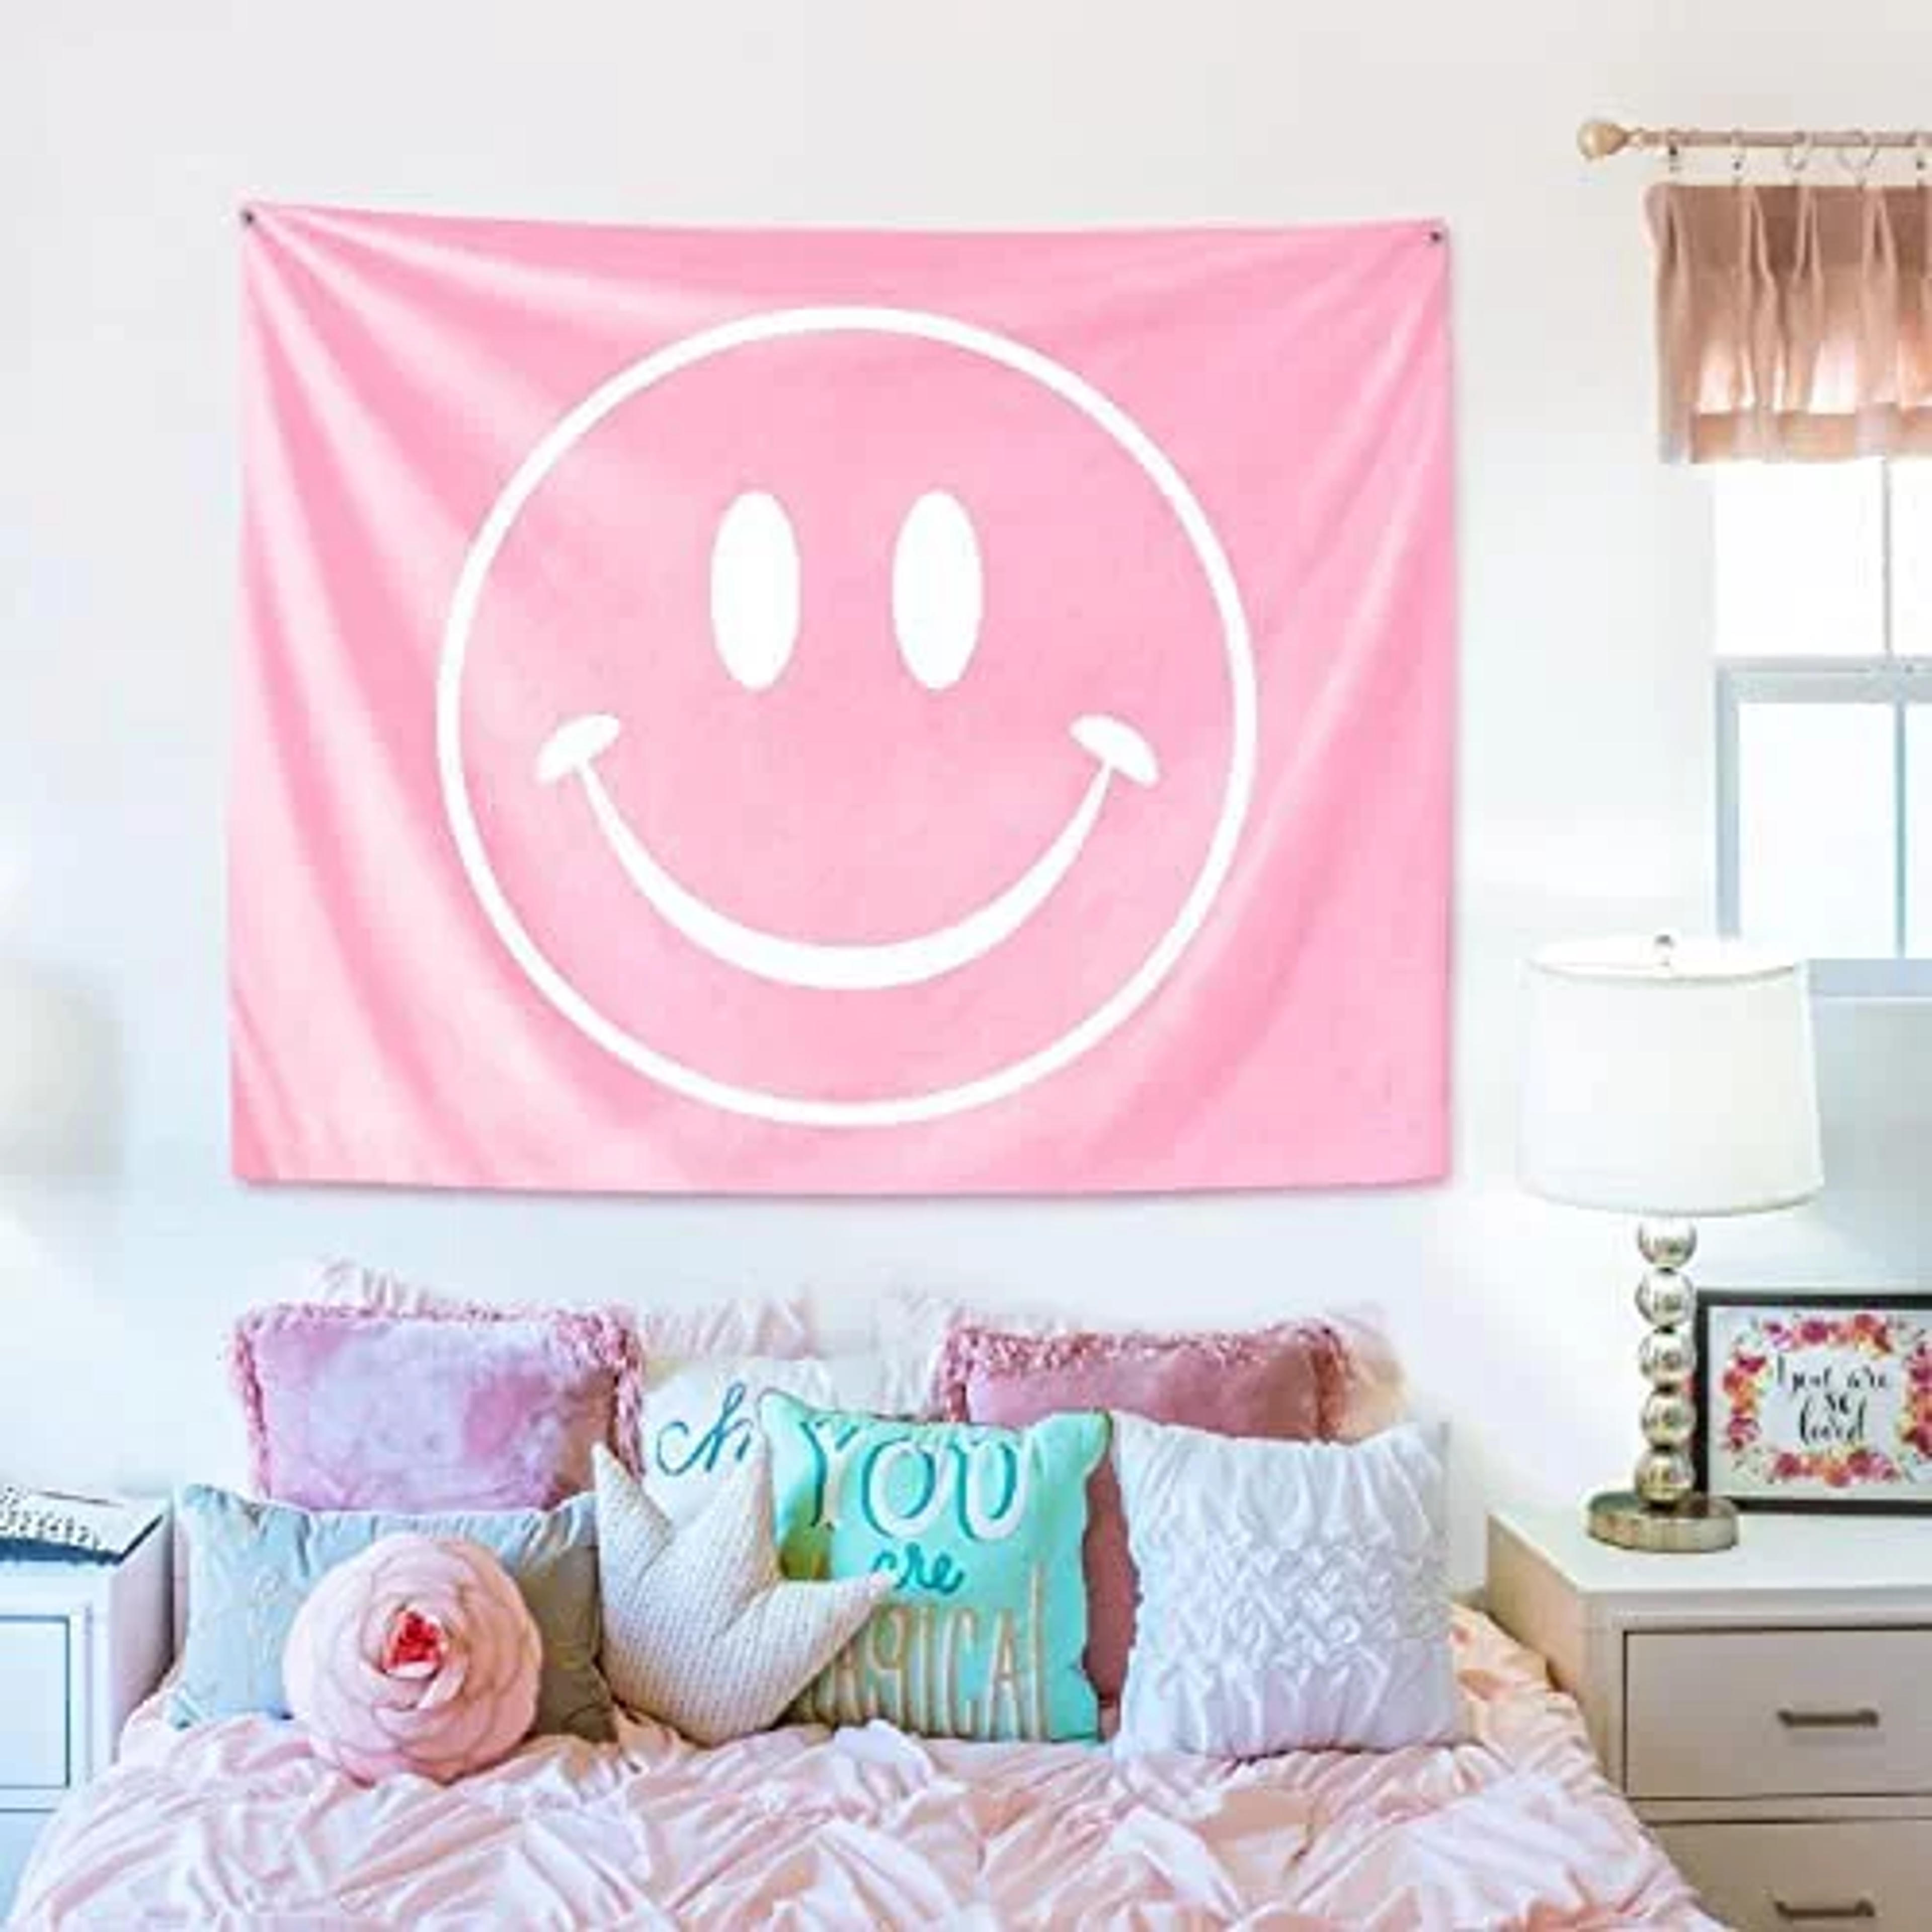 Pink Smiley Face Tapestry Cute Aesthetic Preppy Room Decor Teen Girls College Dorm Decor (60" x 50", Pink Smiley Face) - Walmart.com